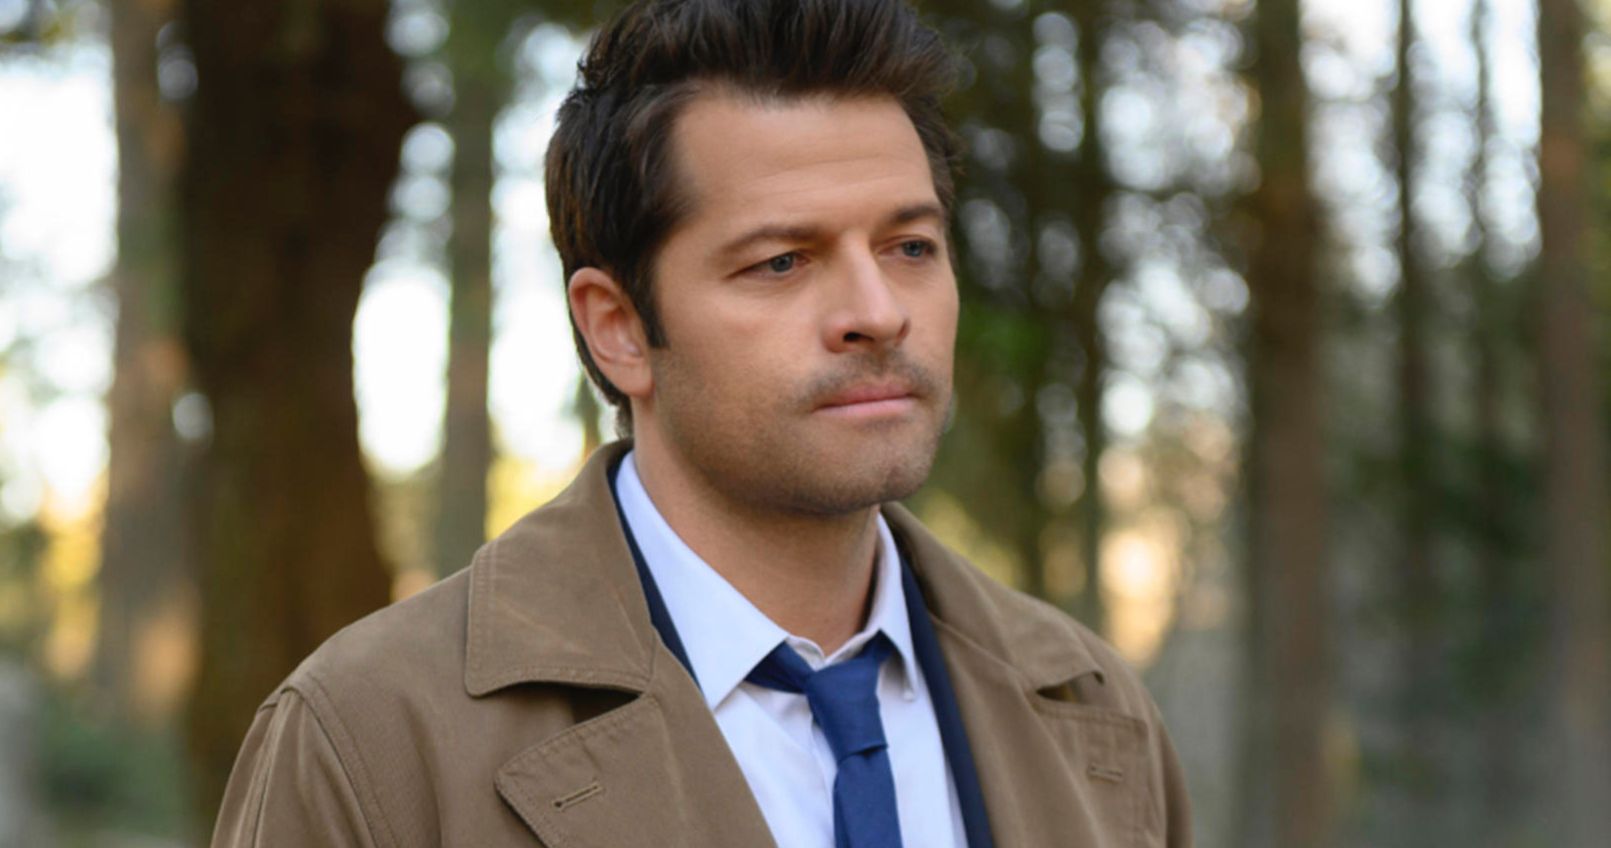 Supernatural Star Misha Collins on Shooting the Final Season: Every Day Is Painful